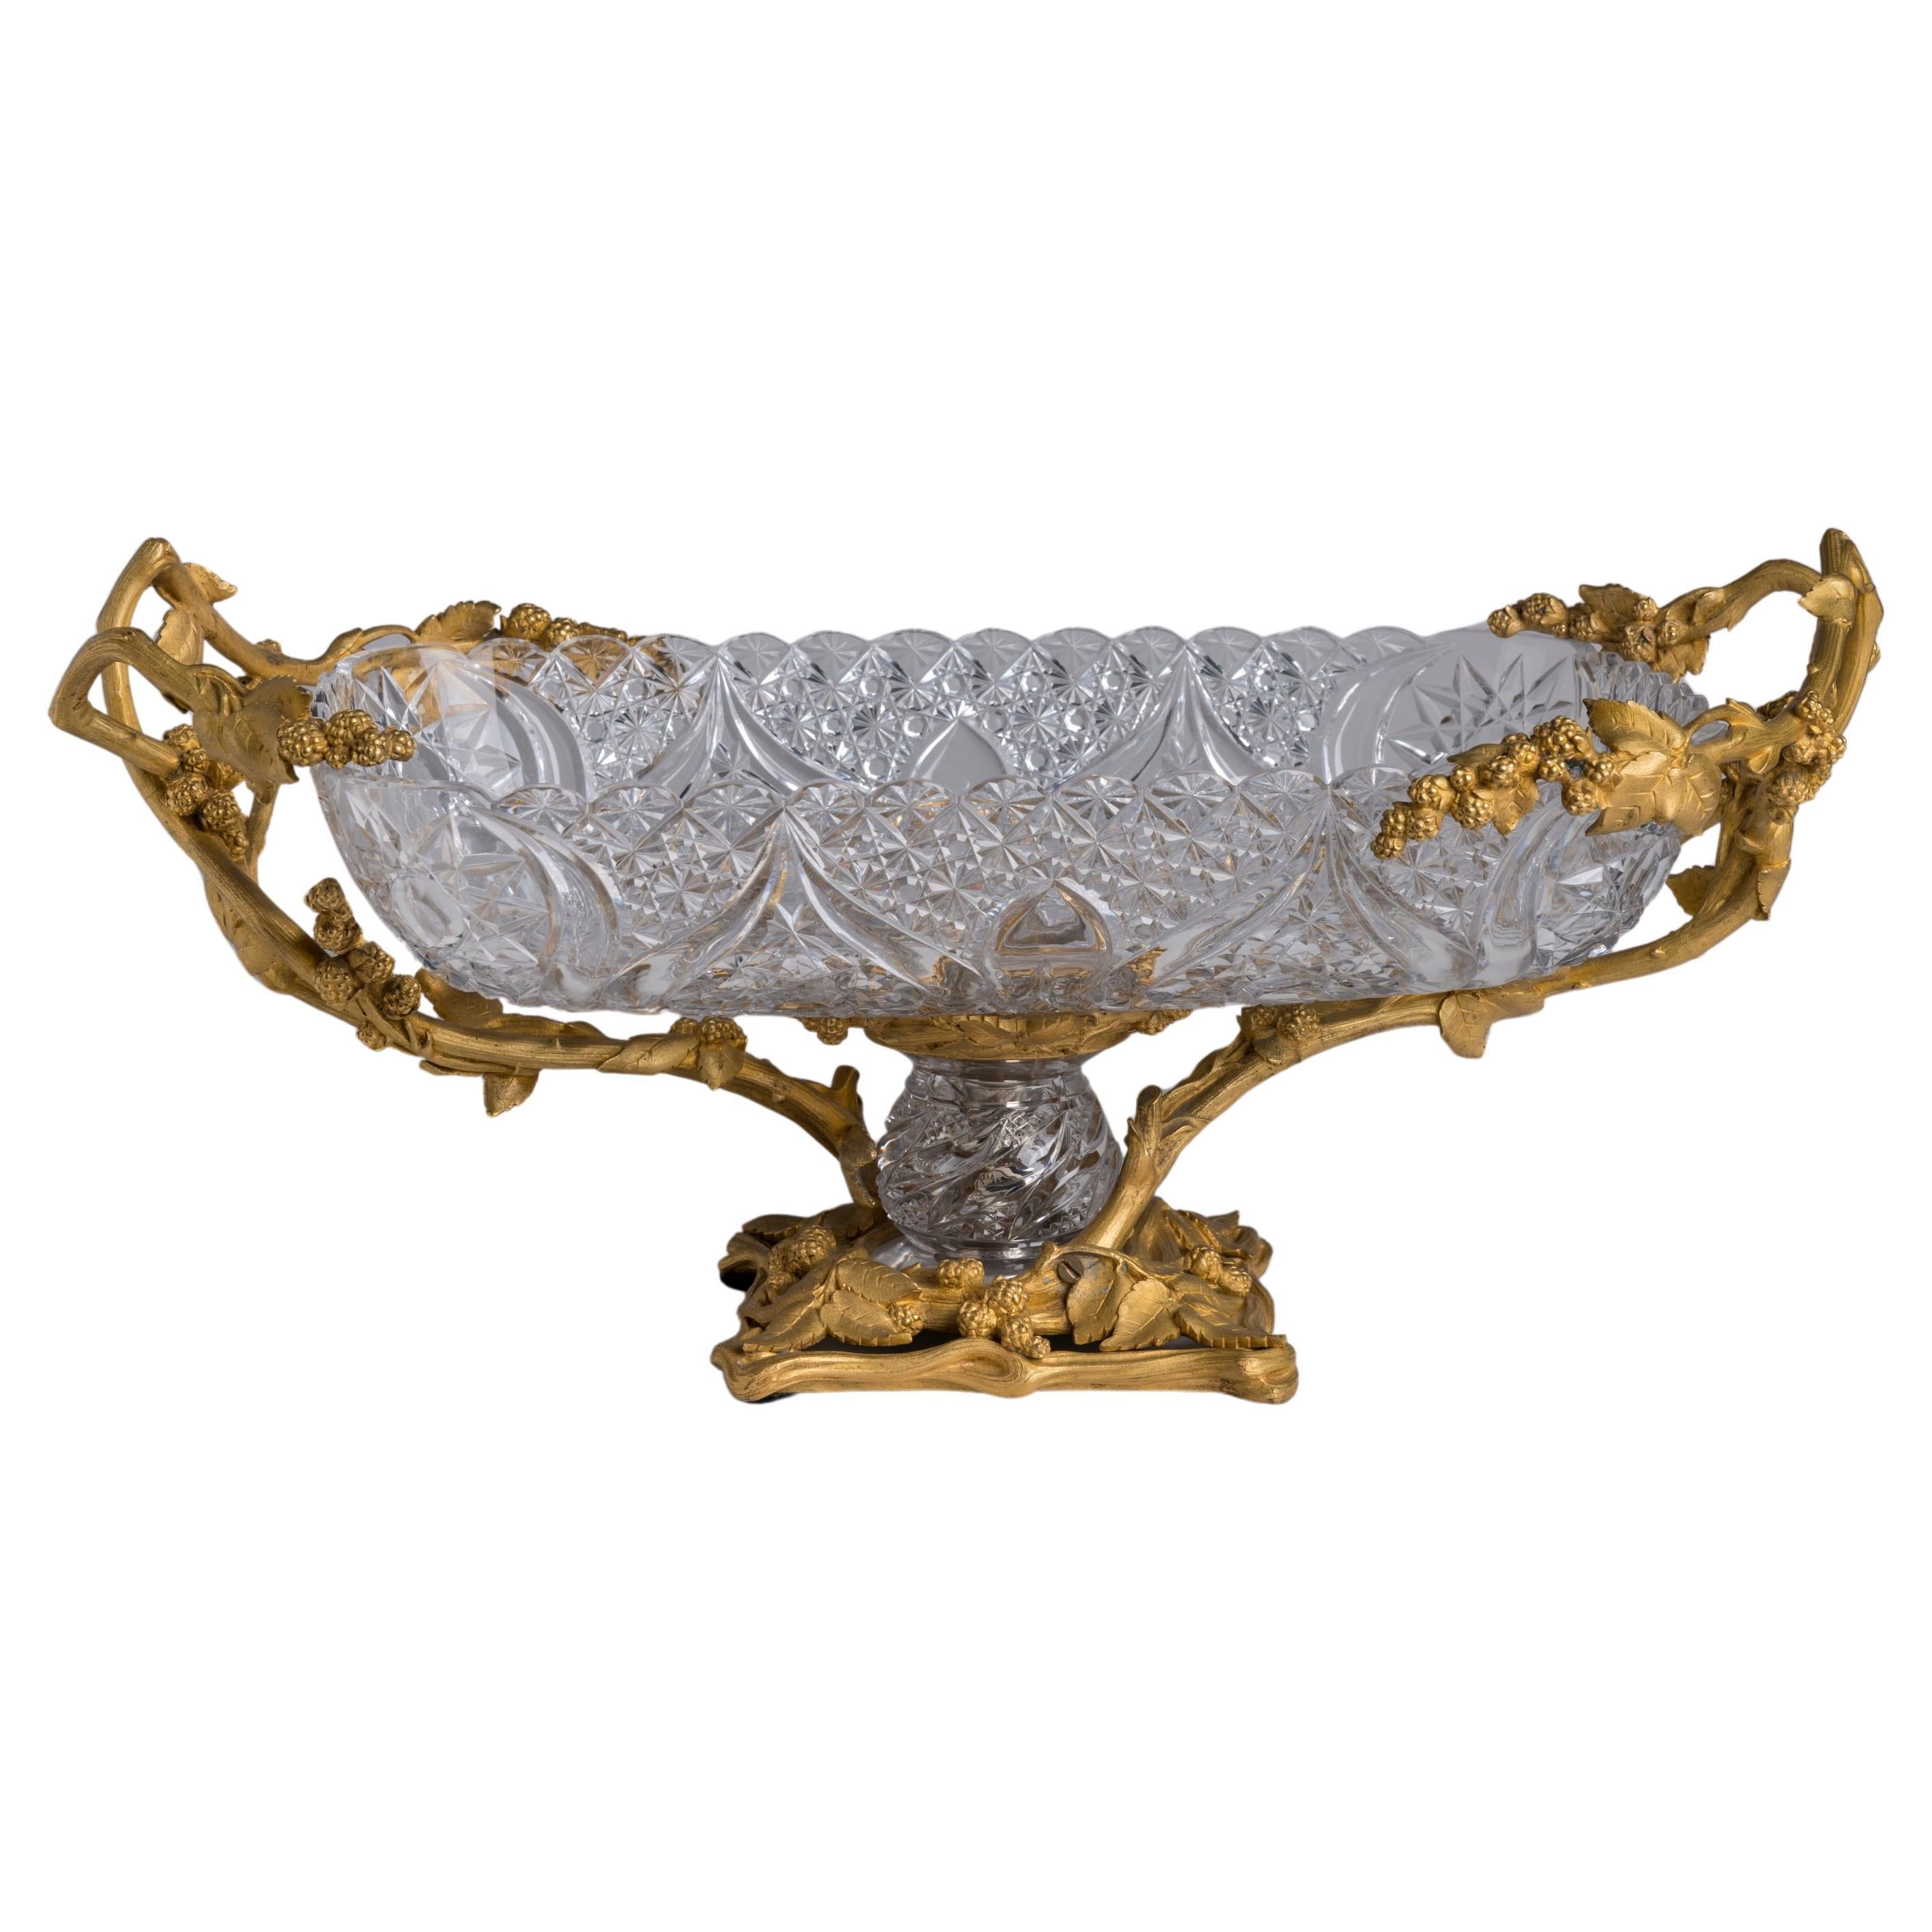 19th Century French Ormolu-Mounted Crystal Centrepiece attributed to Baccarat For Sale